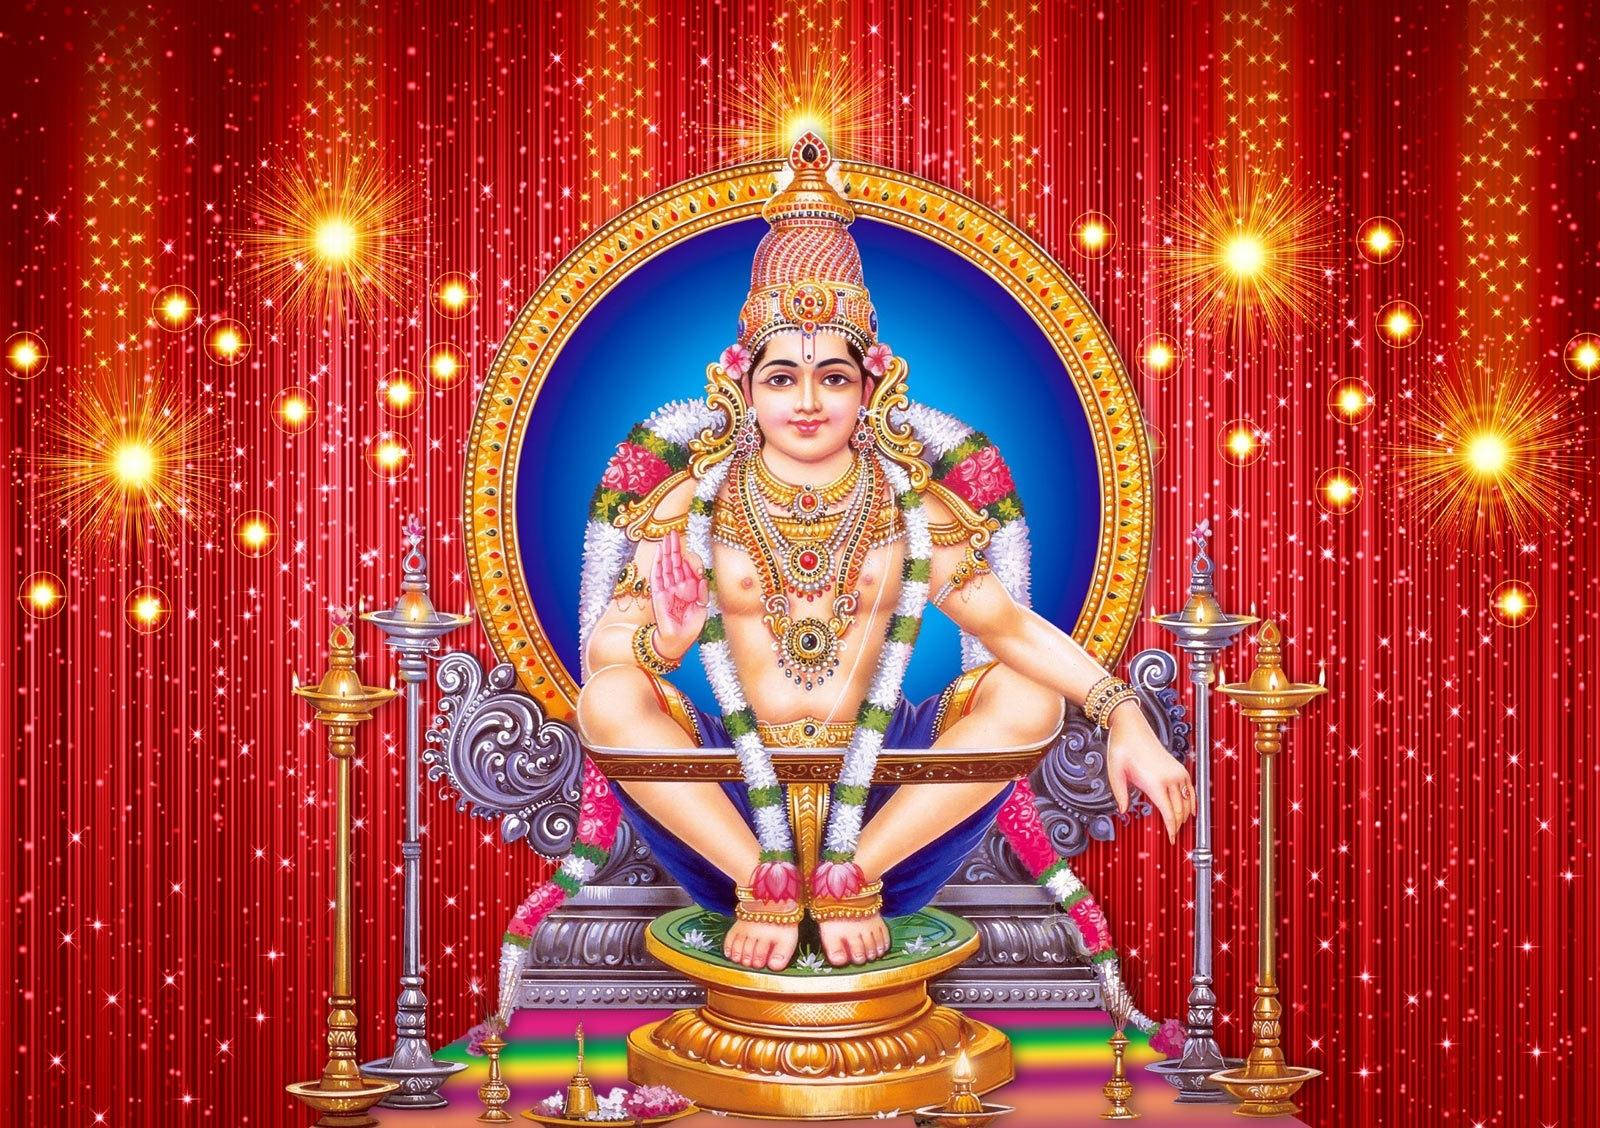 Glowing Visage of Lord Ayyappa with Vivid Fireworks Wallpaper